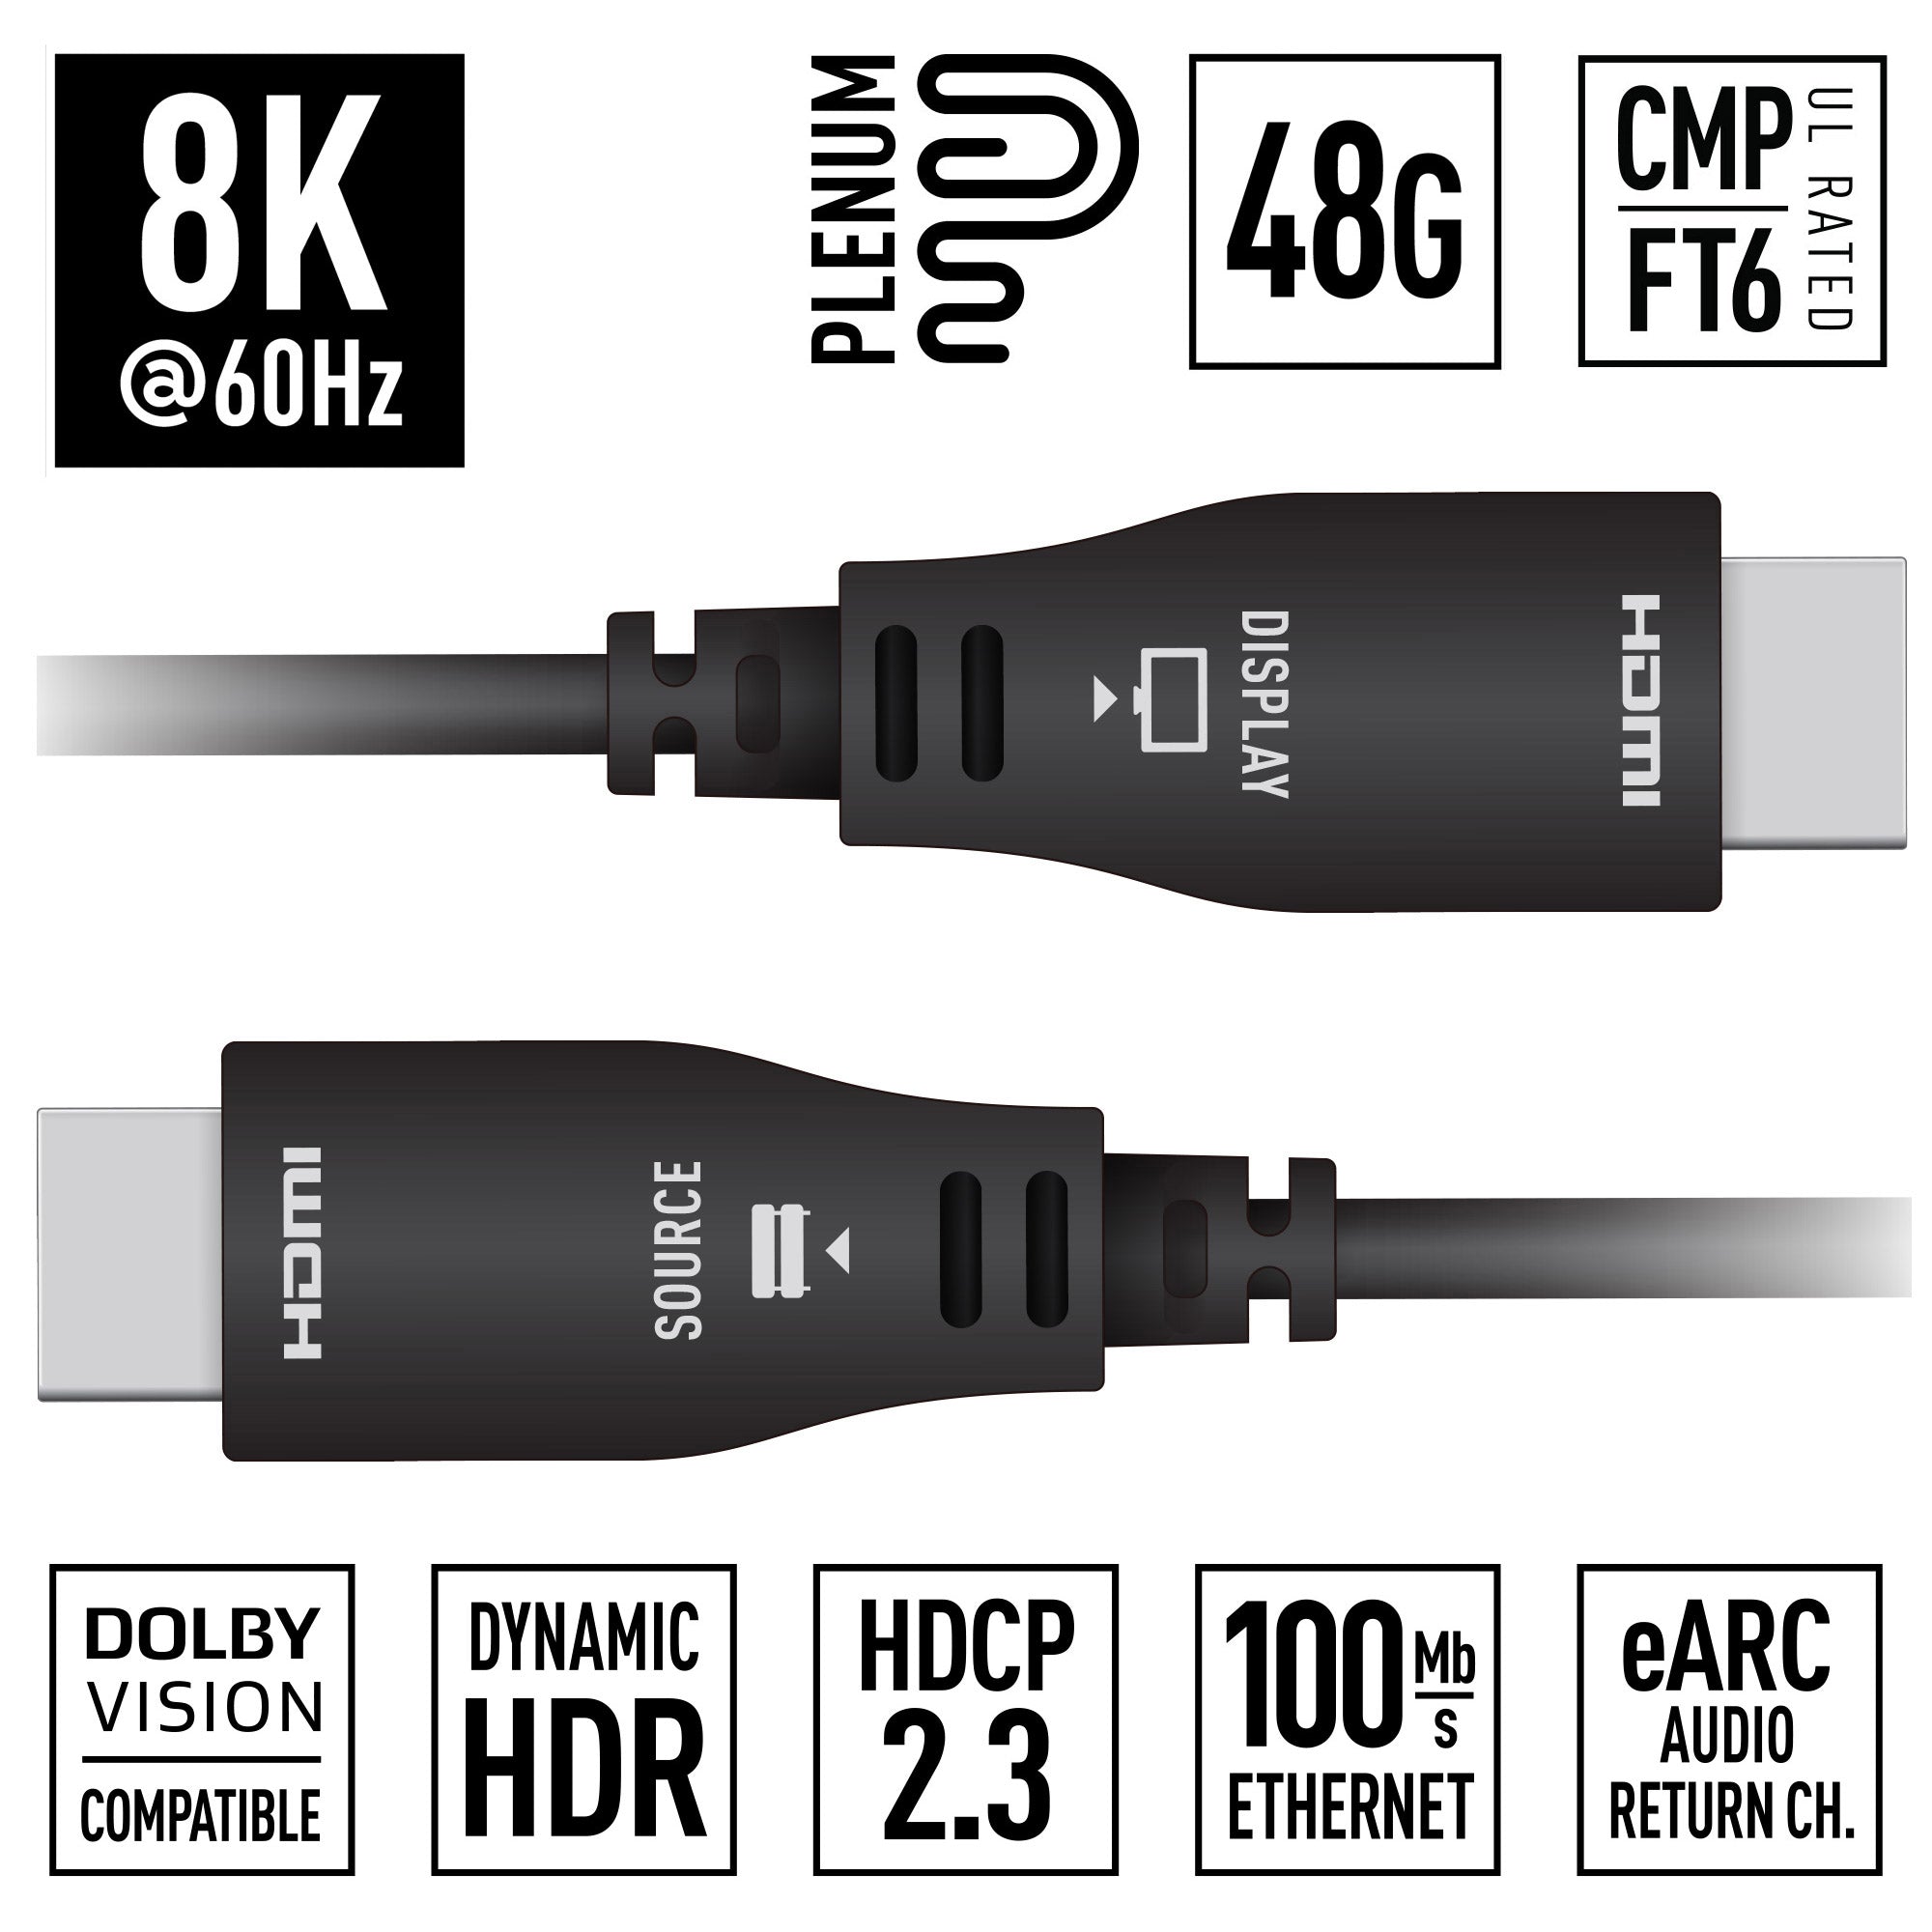 Key Digital 98FT (30M) 8K/48G Plenum Hybrid Fiber Optic Ultra High Speed HDMI Cable. Supports Dynamic HDR, Dolby® Vision, HDCP2.3, eARC, CMP / FT6 UL Rated - KD-AOCH98P